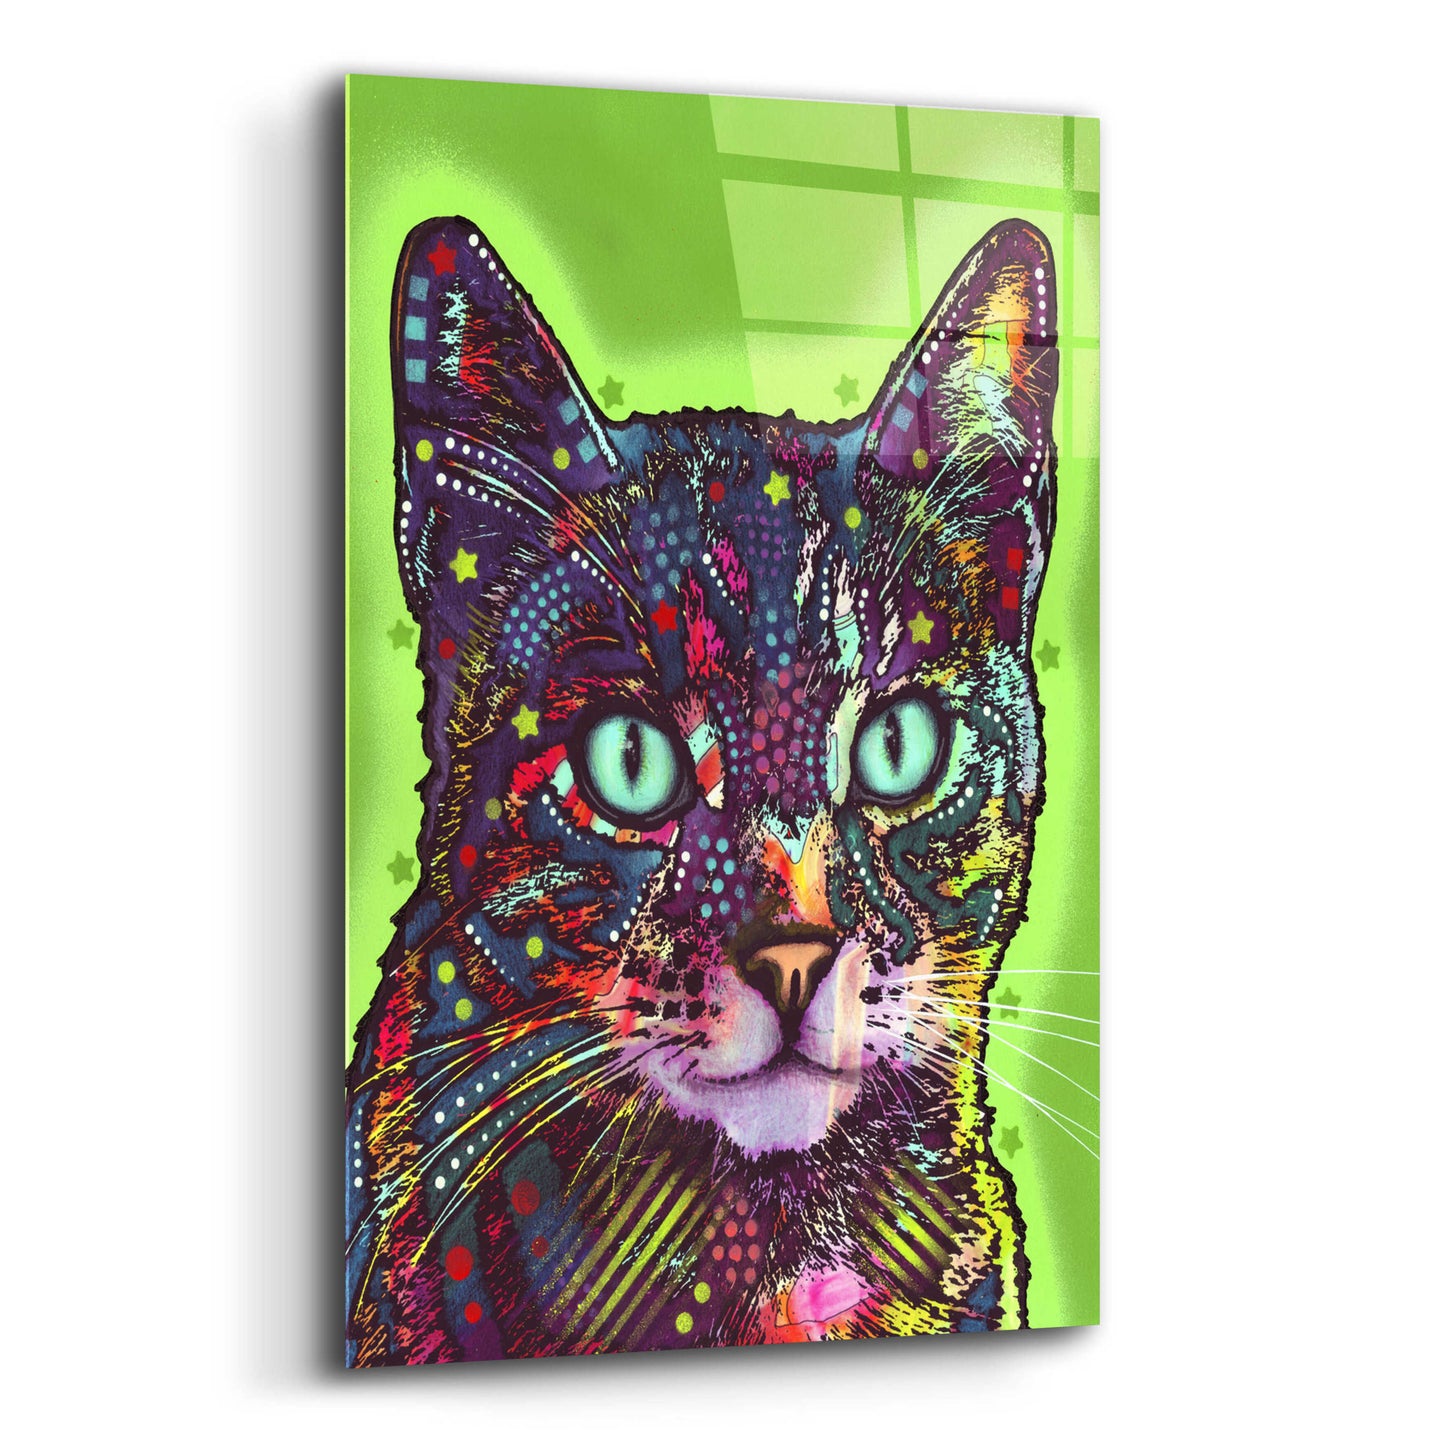 Epic Art 'Watchful Cat' by Dean Russo, Acrylic Glass Wall Art,16x24